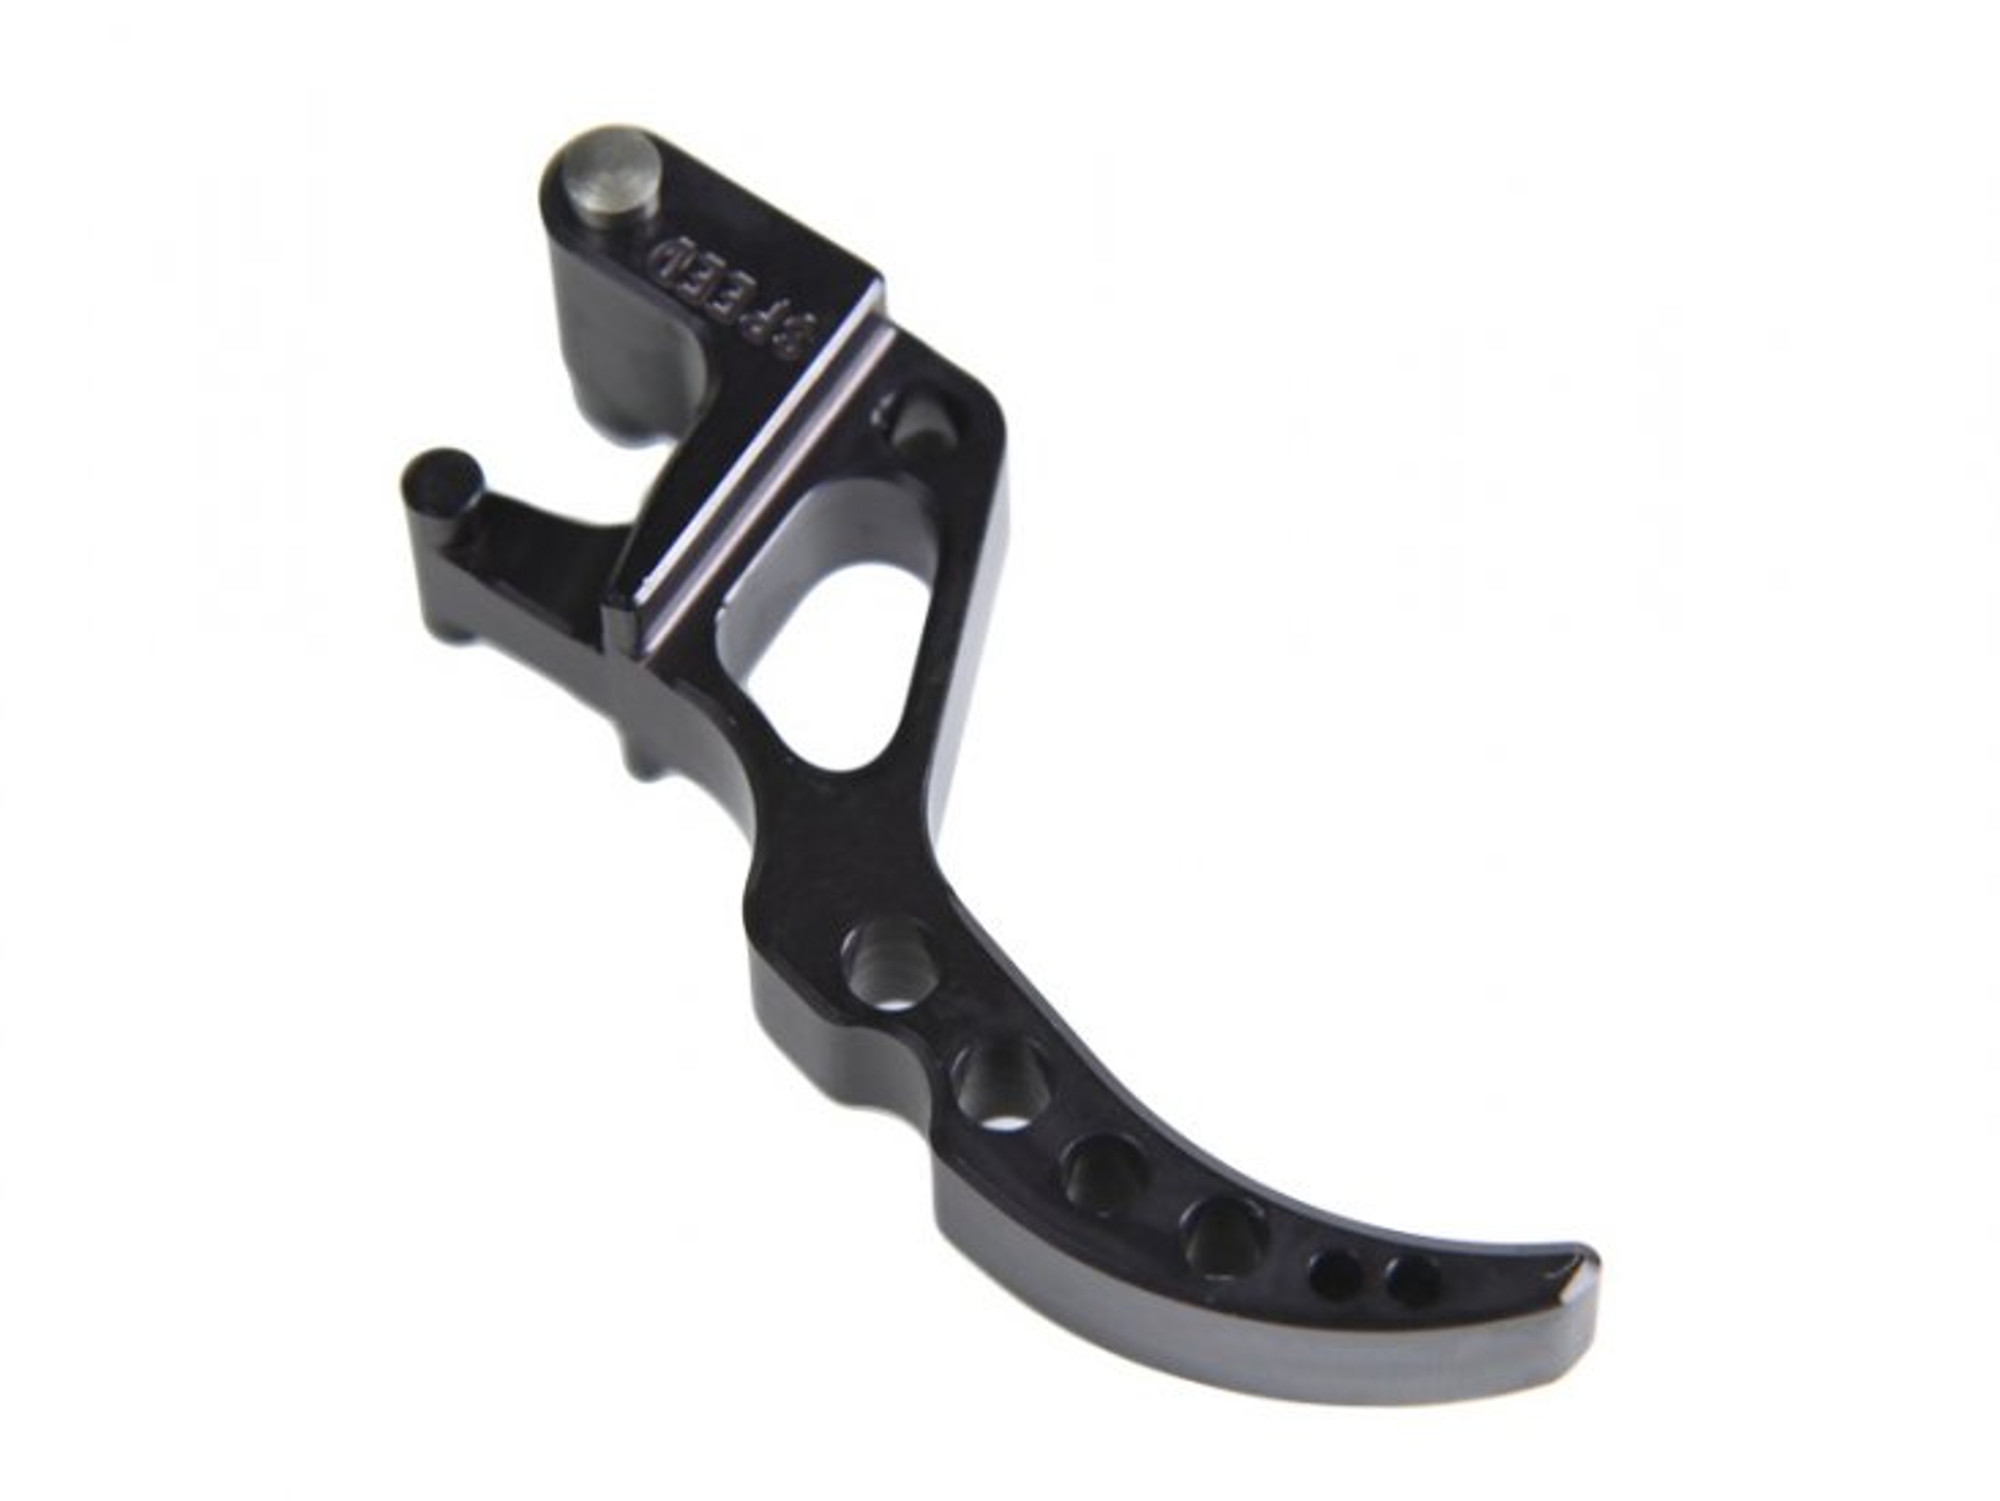 Speed Airsoft Tunable STD Trigger for AK/MTC - Black